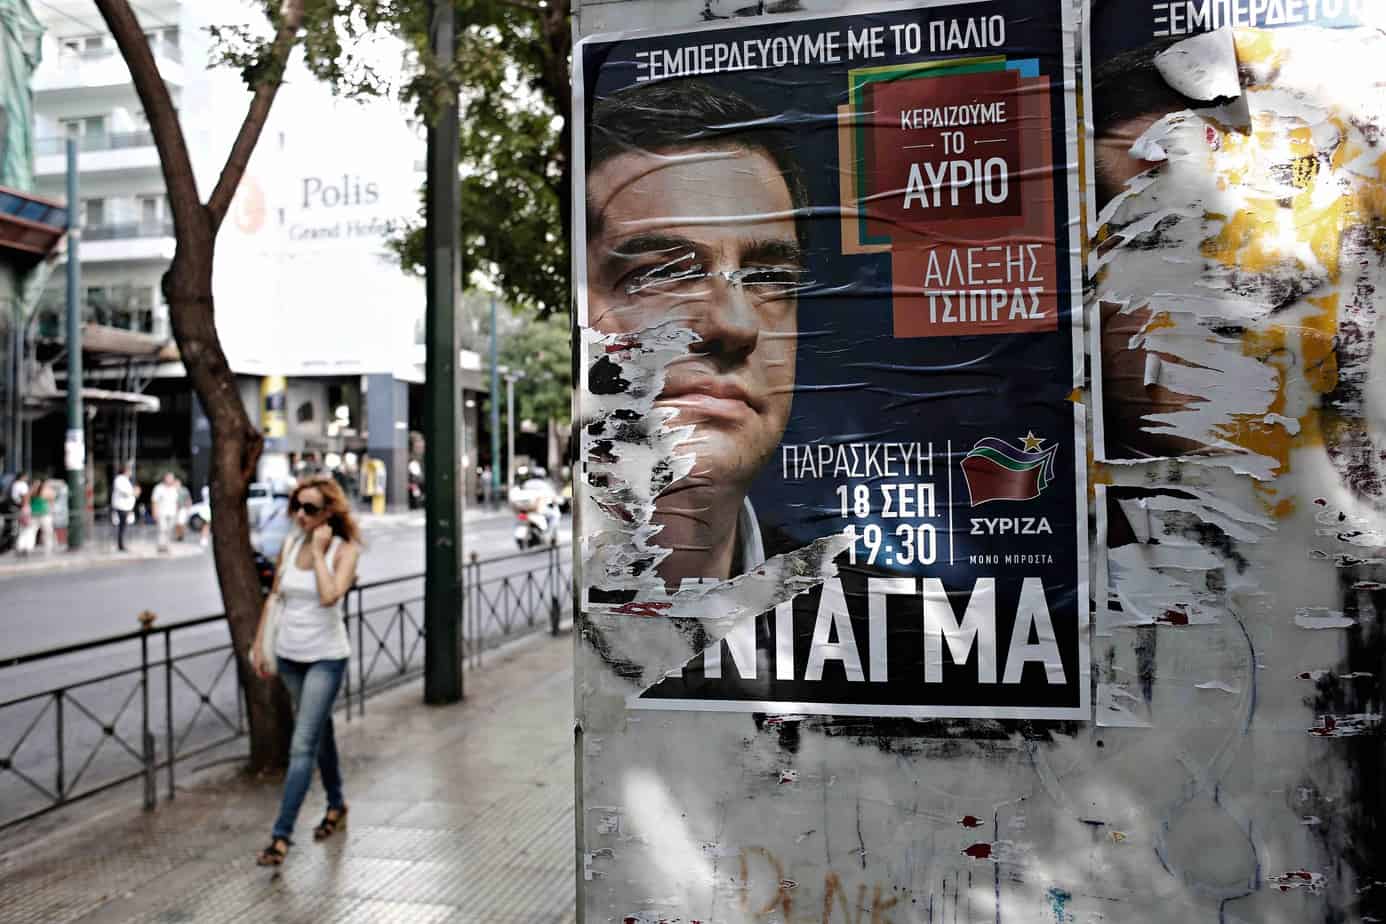 The lost art of consensus: polarisation, tension and conflict in the upcoming Greek elections